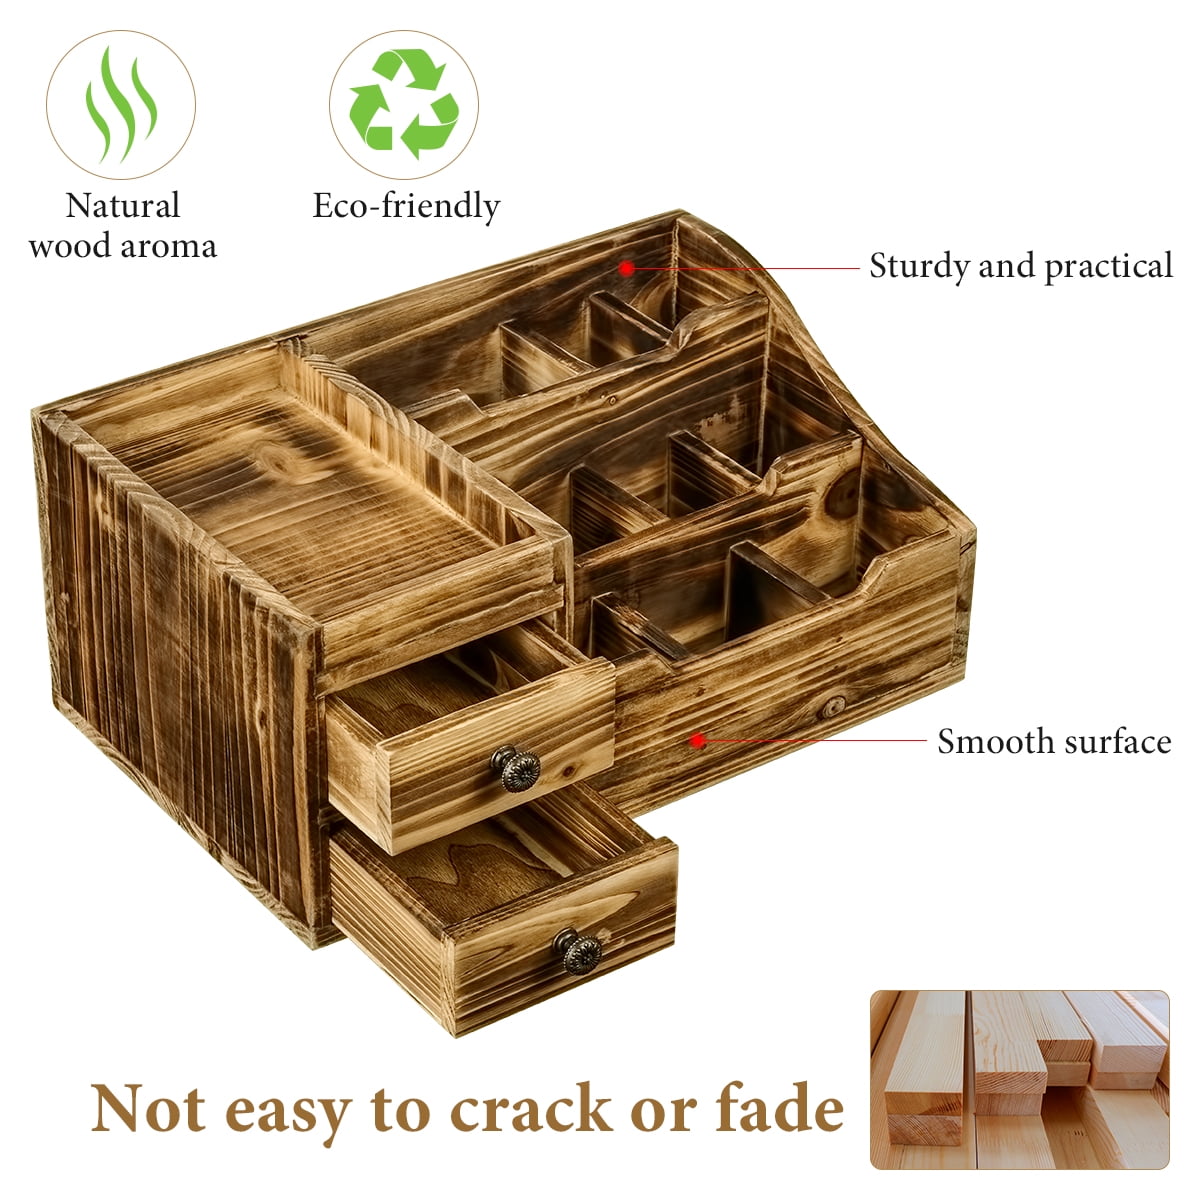  Besti Rustic Vanity Organizer for Cosmetics, Makeup, and  Bathroom Accessories, Wooden Farmhouse Storage Box with 3 Drawers, Vintage  Countertop, Dresser, or Desk Organization : Beauty & Personal Care